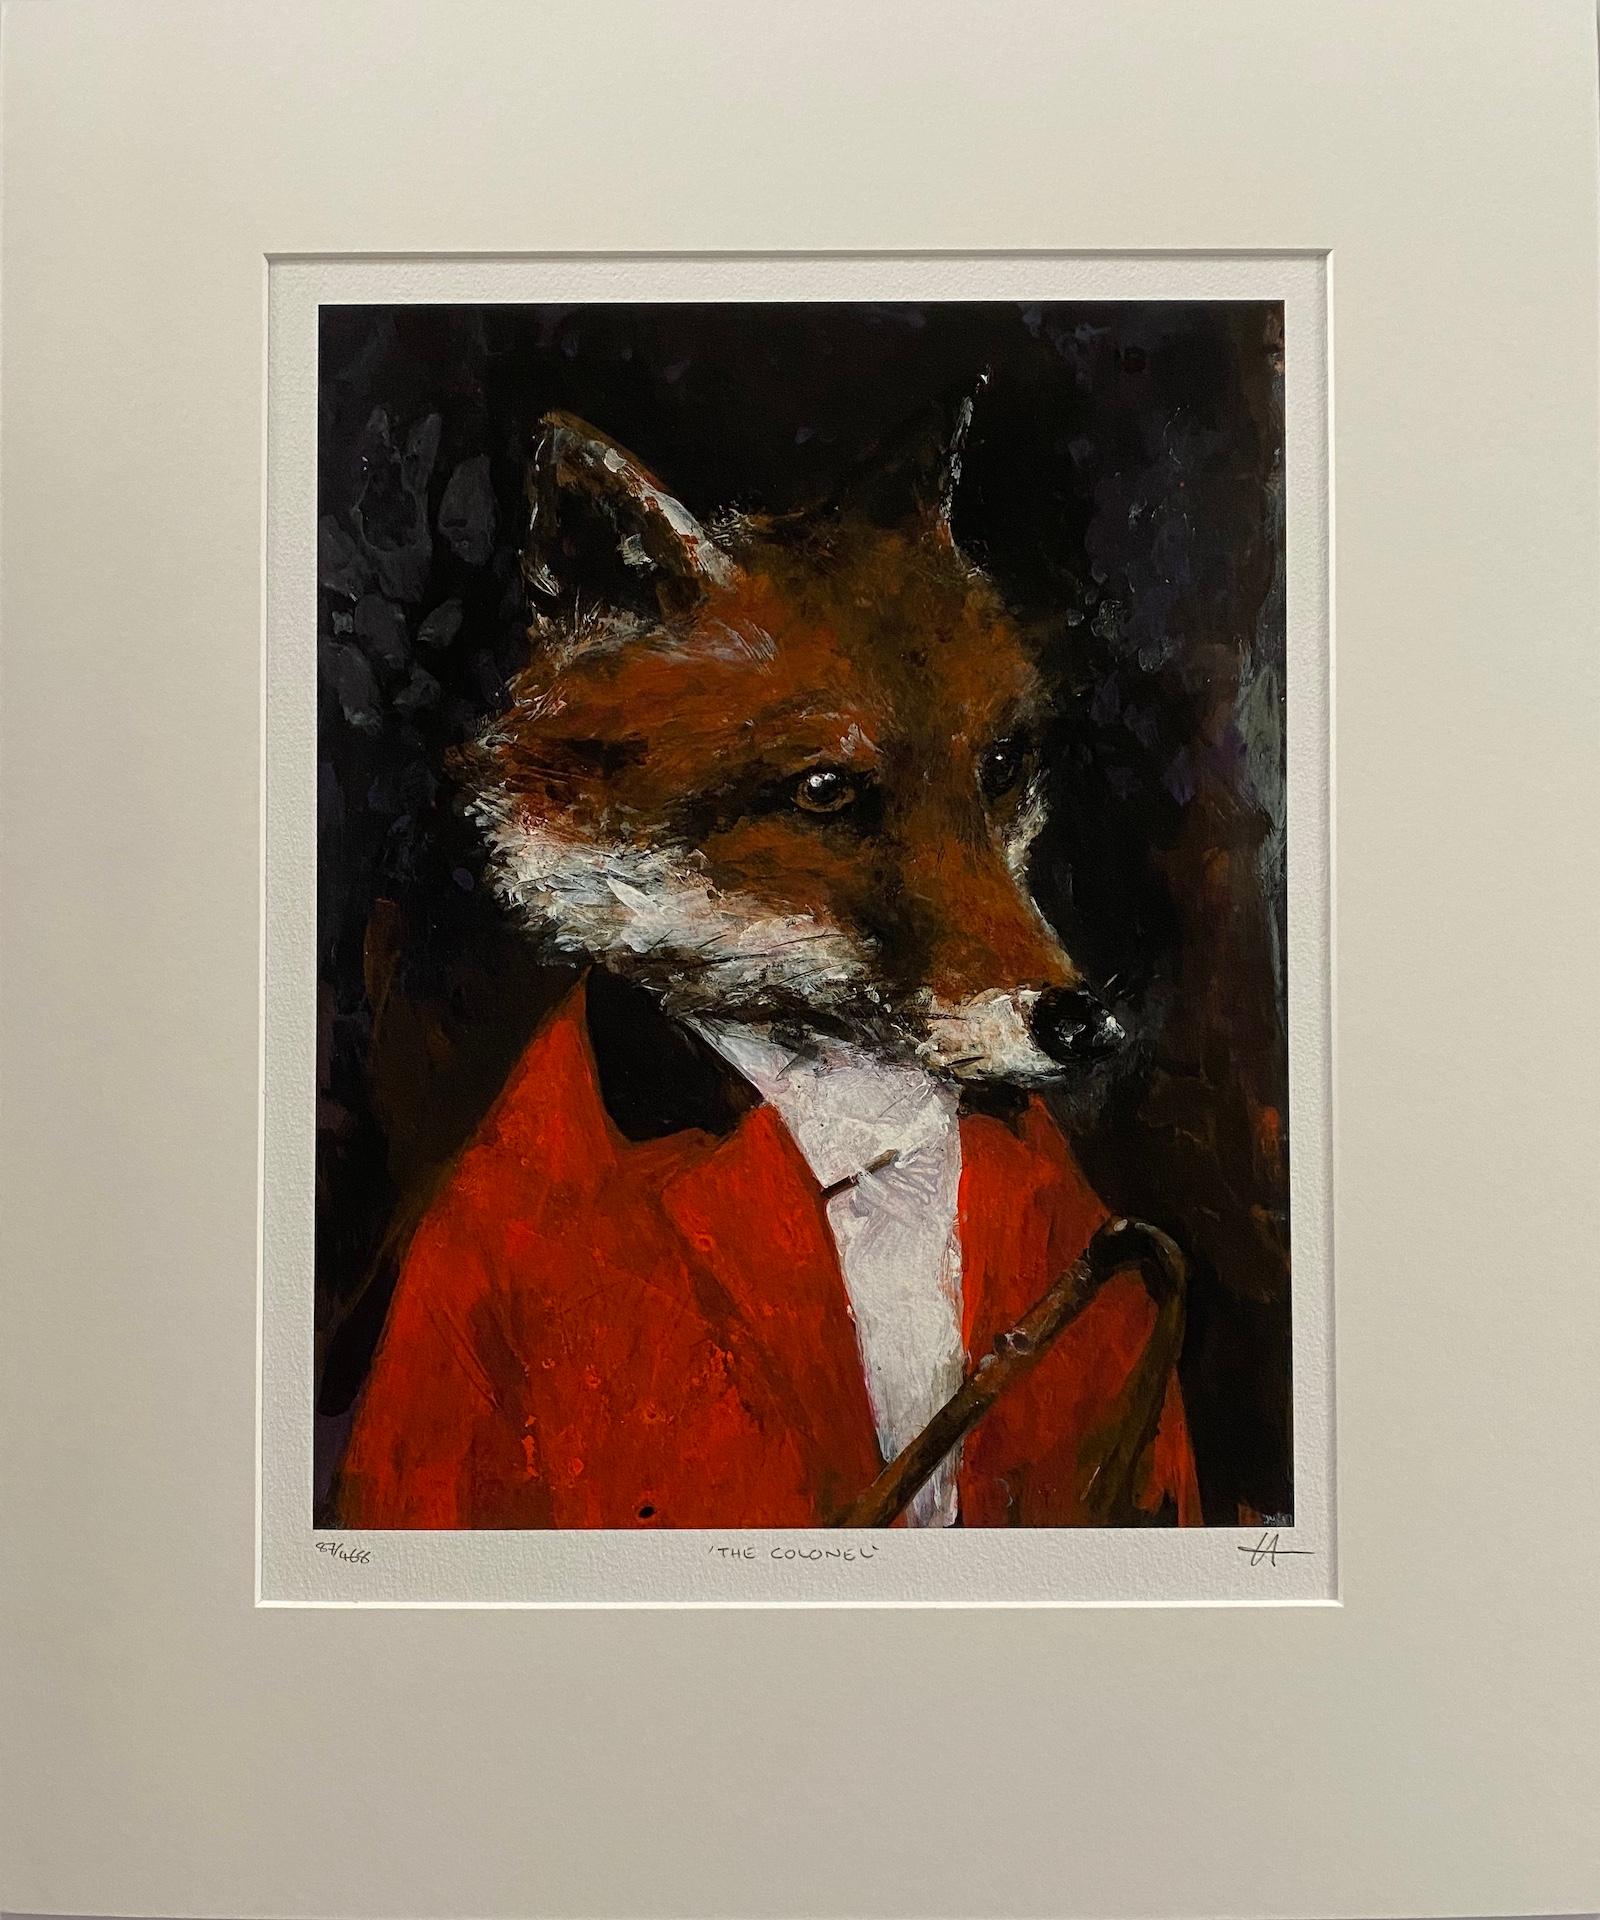 The Colonel, Limited Edition Print, Contemporary Art, Fox art, Animal print  - Black Animal Print by Harry Bunce